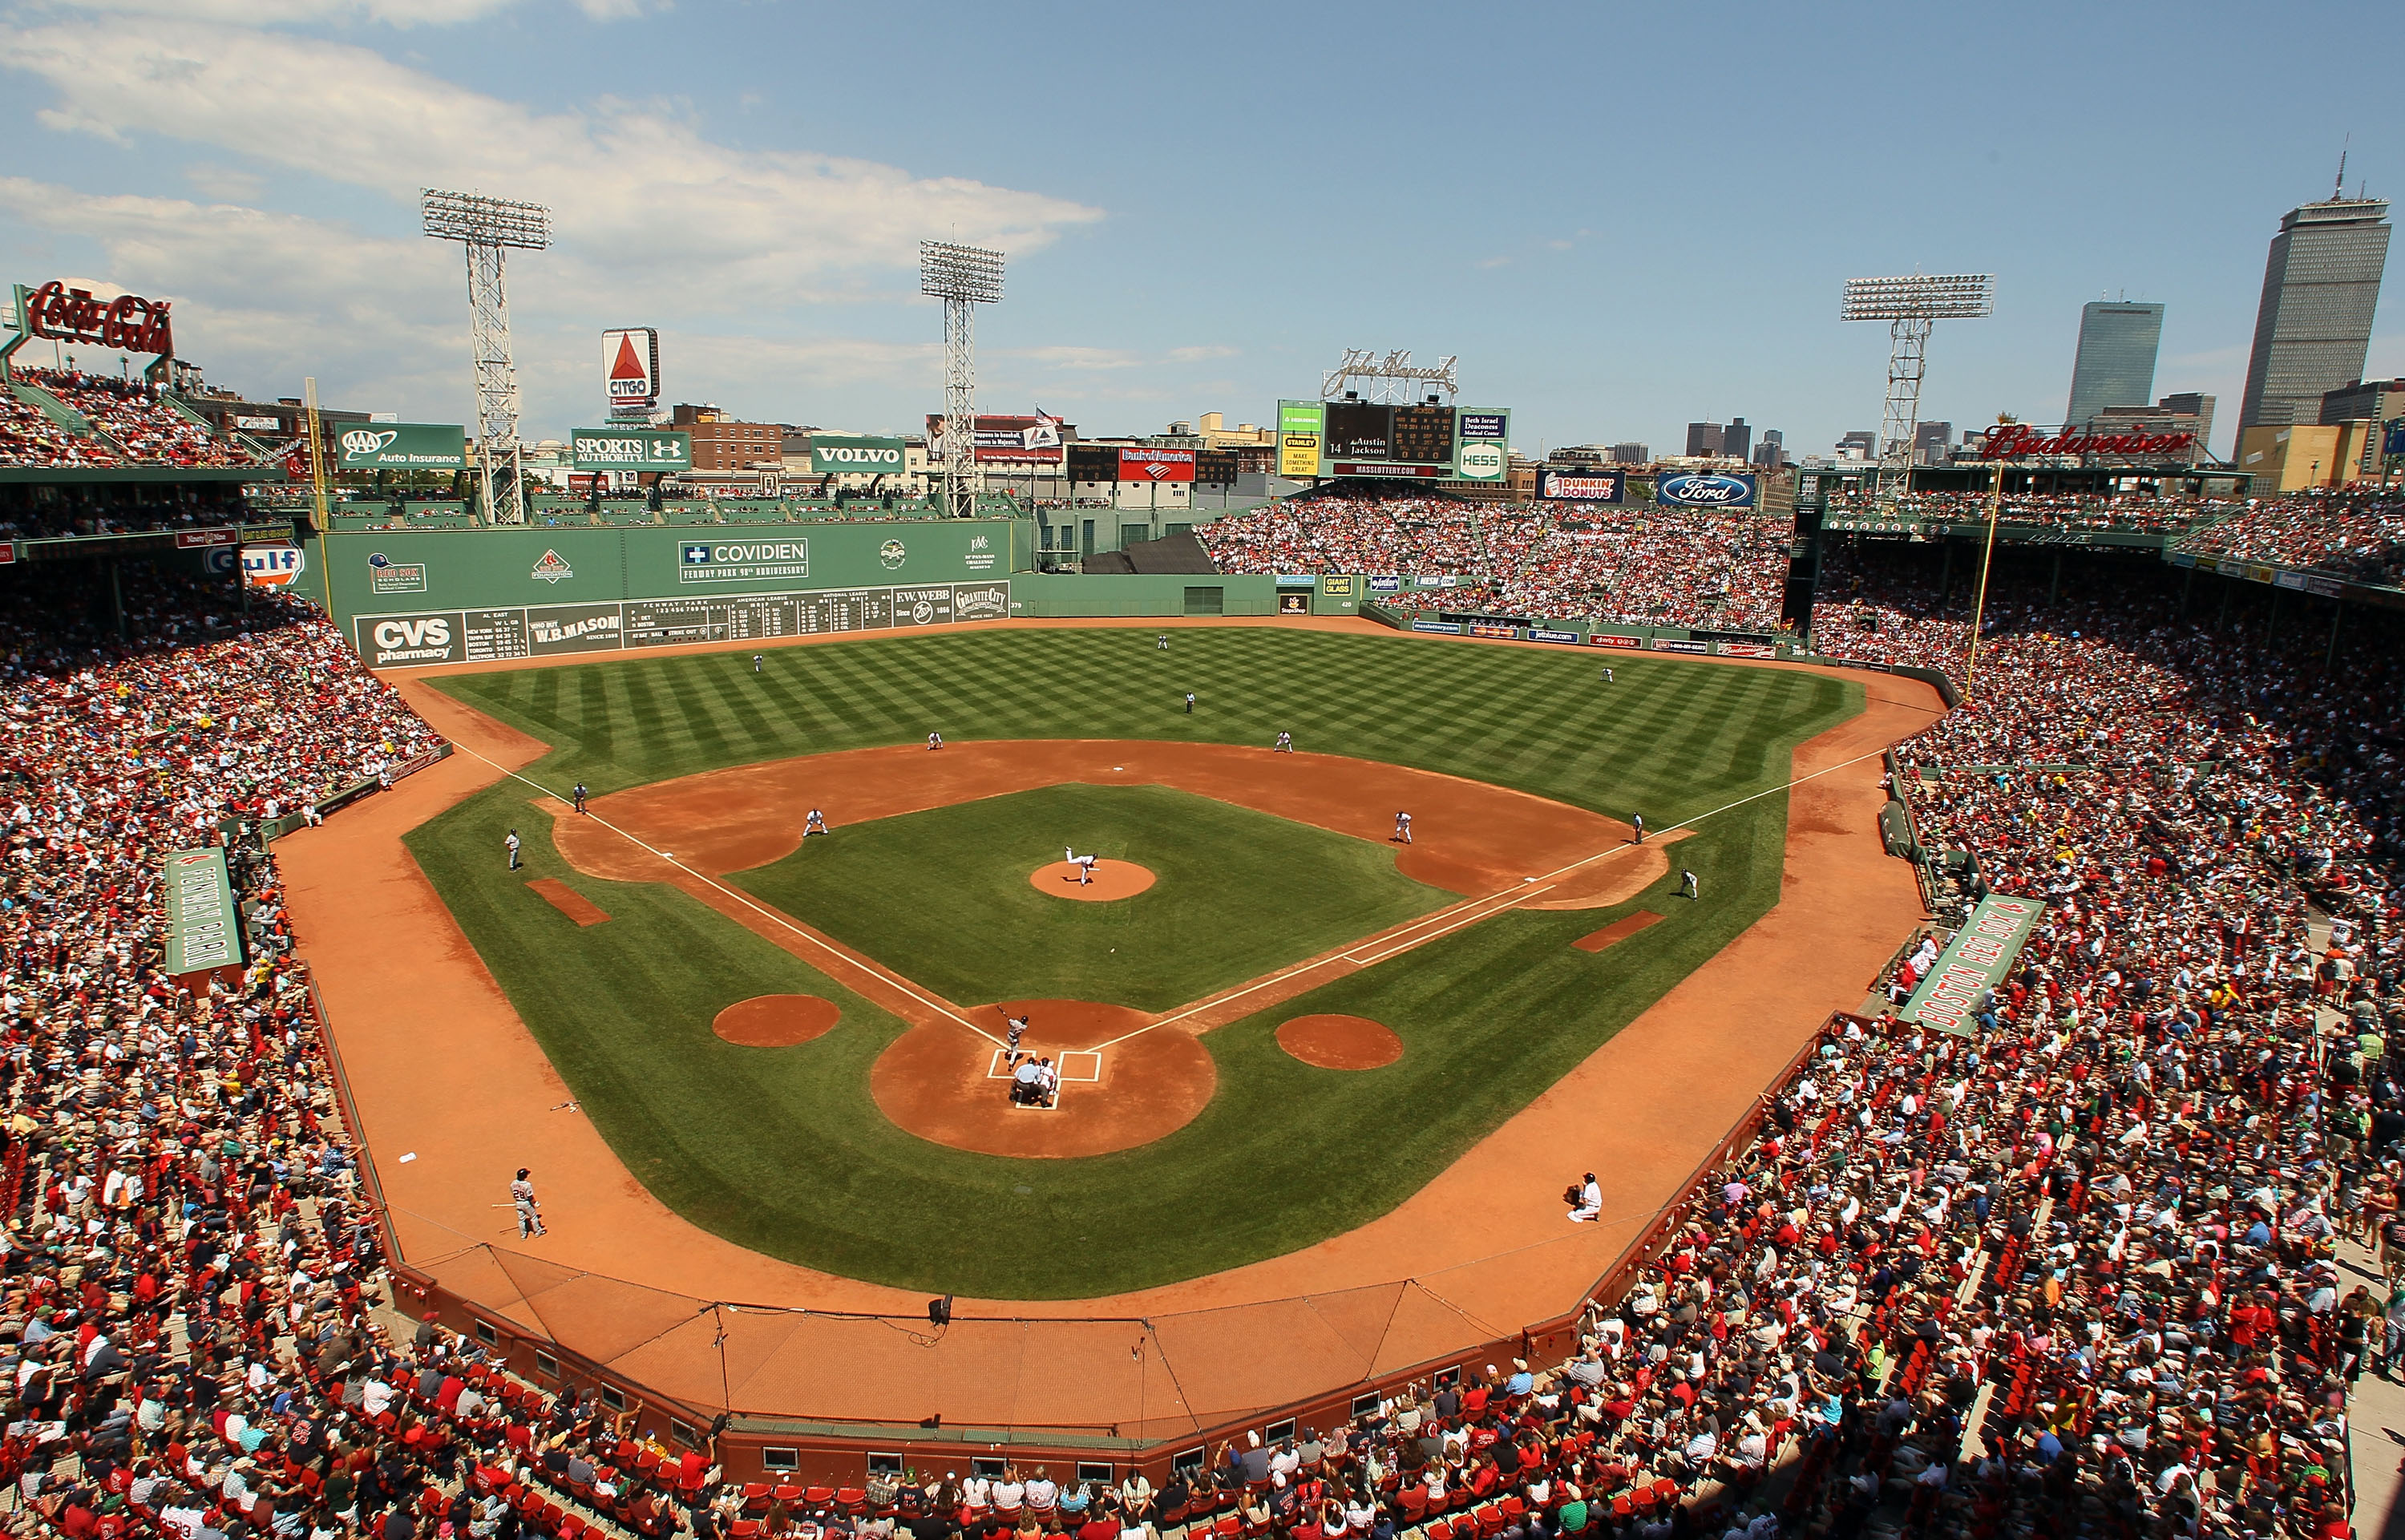 MLB News: MLB Field Dimensions: What are the dimensions of a baseball field?